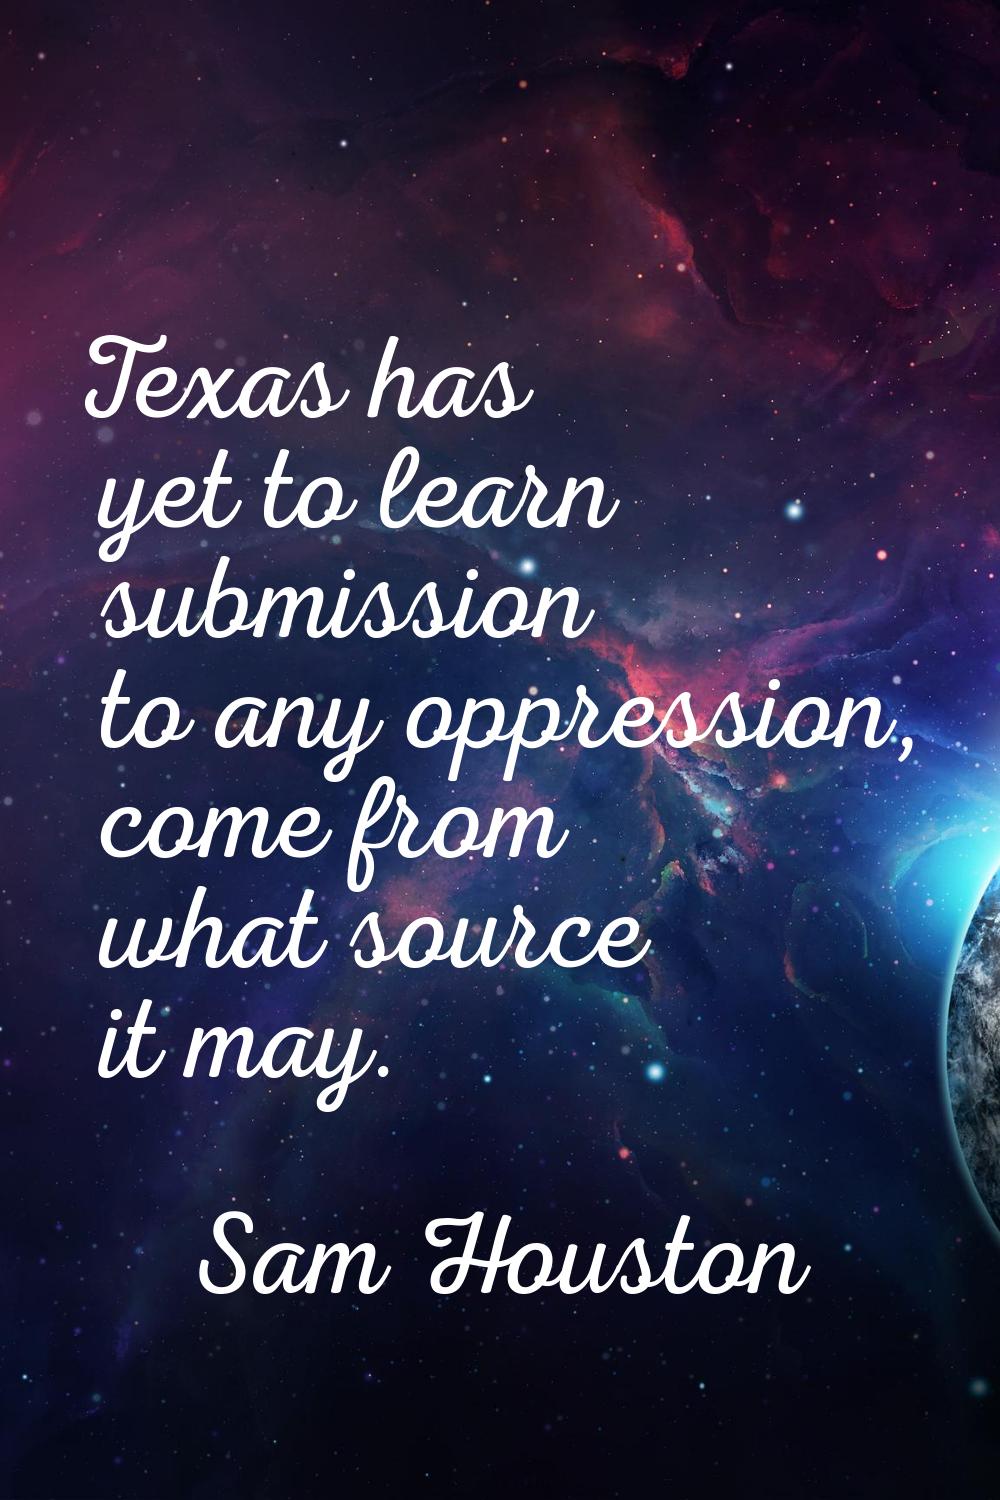 Texas has yet to learn submission to any oppression, come from what source it may.